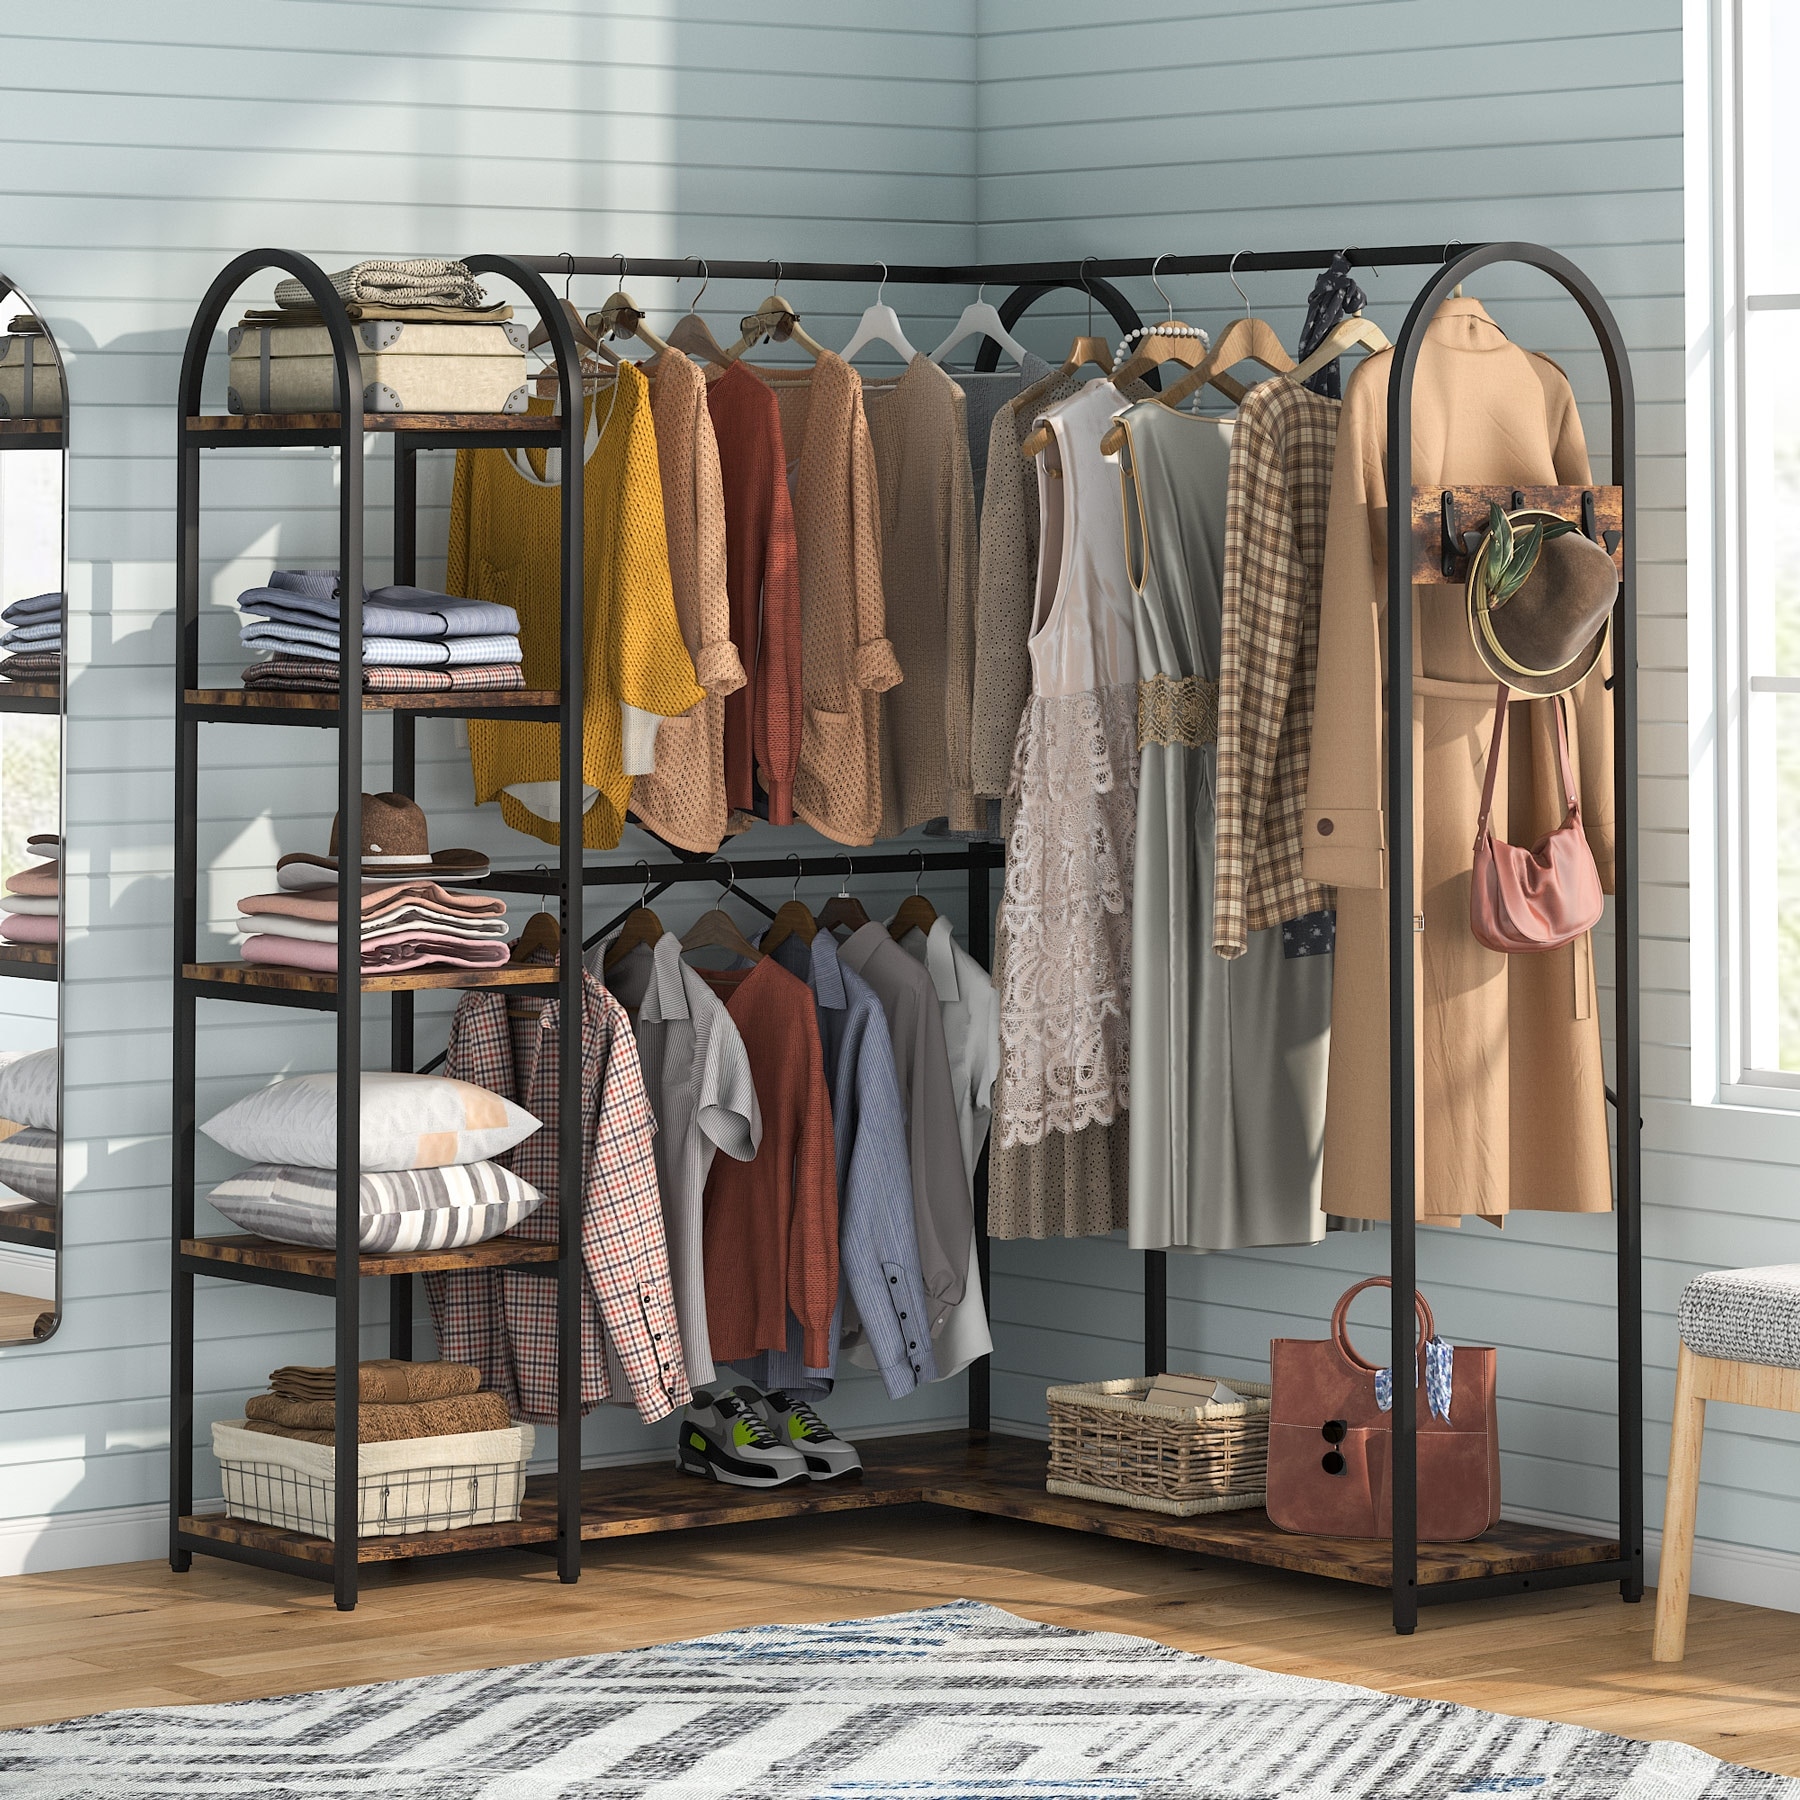 https://ak1.ostkcdn.com/images/products/is/images/direct/819a3c8c54f3adb899cae98fadb32e75cb43b6a3/Industrial-L-Shaped-Closet-Organizer%2C-Freestanding-Corner-Clothes-Garment-Rack-with-Hanging-Rods-and-Storage-Shelves.jpg